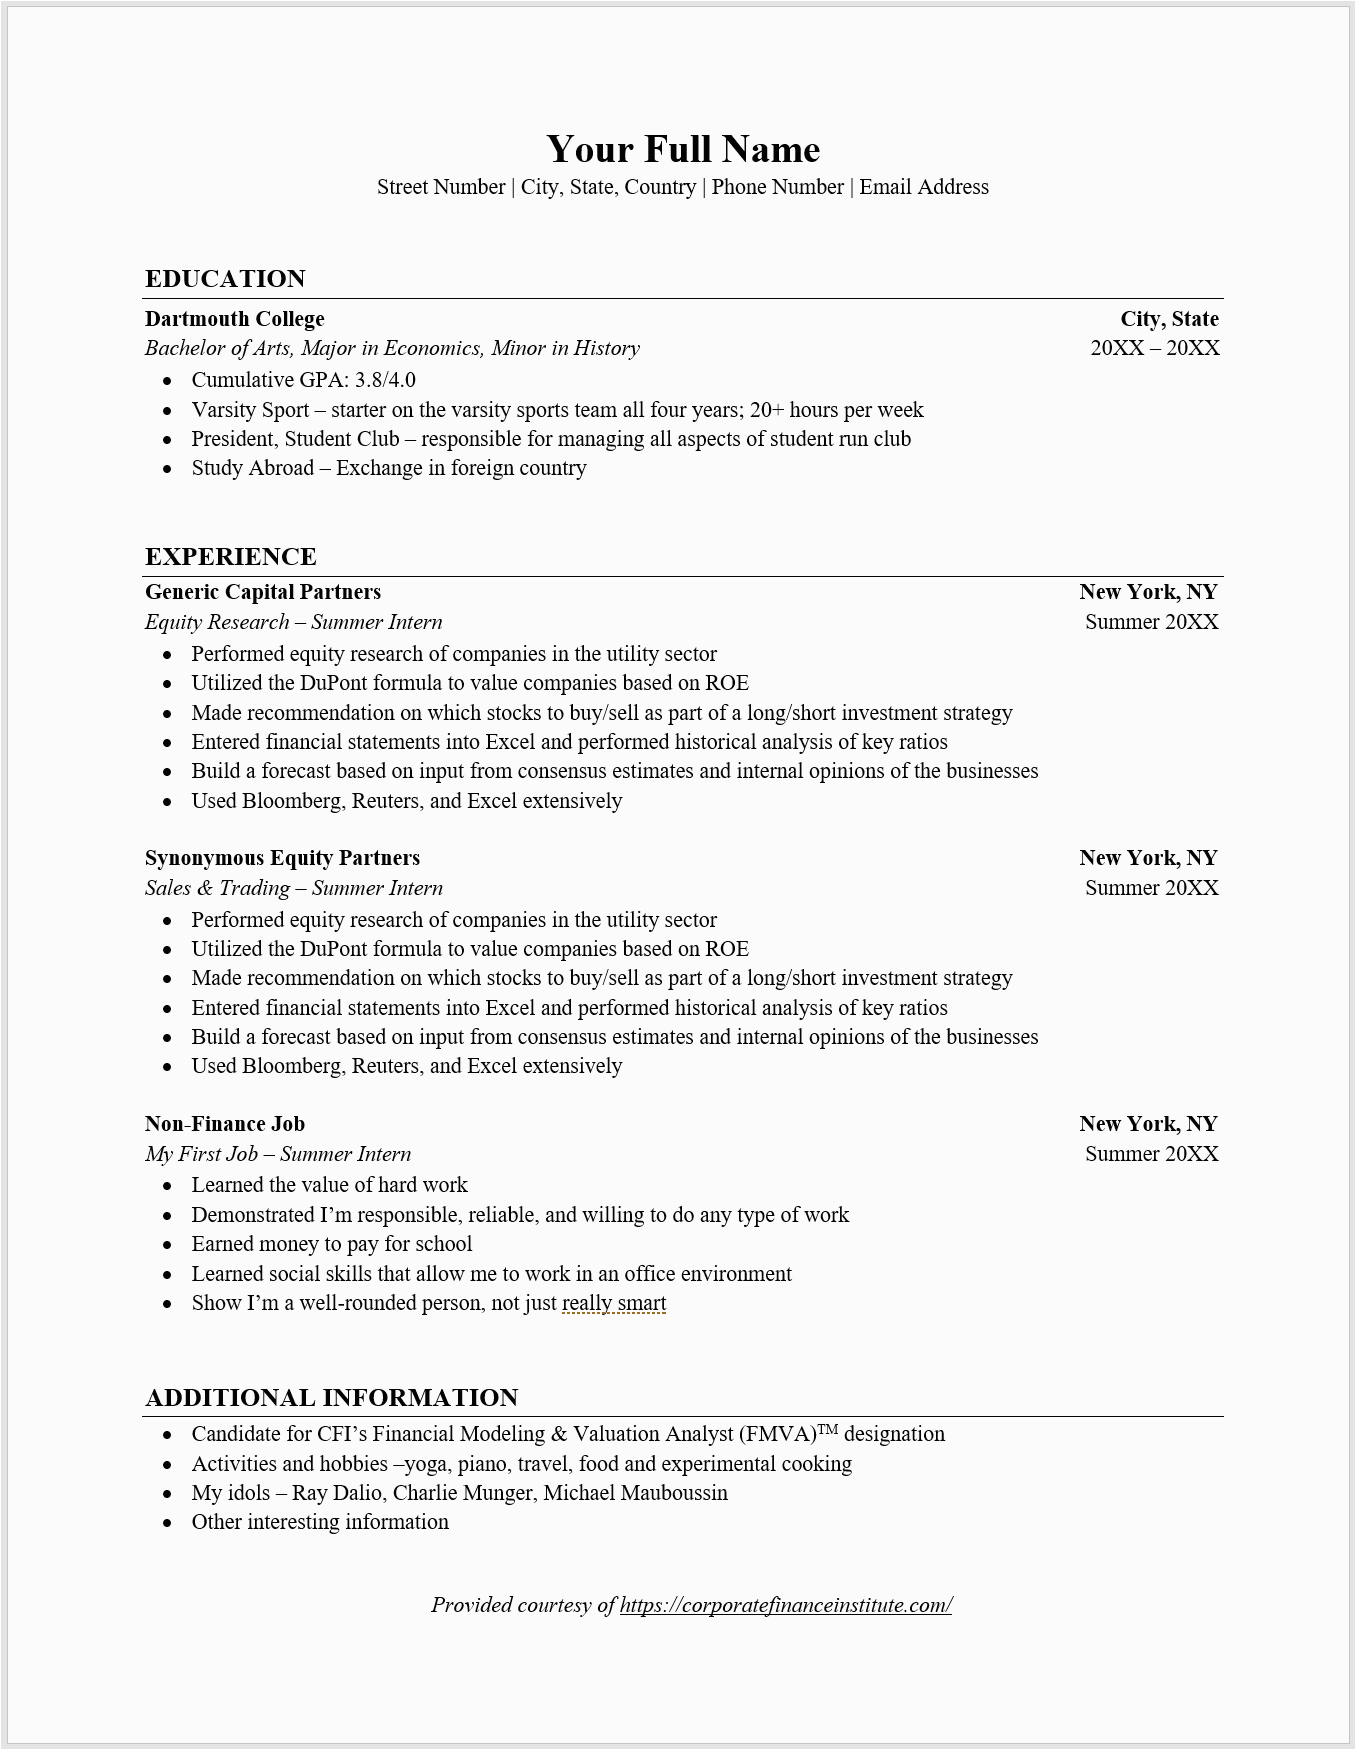 Sample Resume for College Student with Minor How to List Minor On Resume Overview Guide Examples